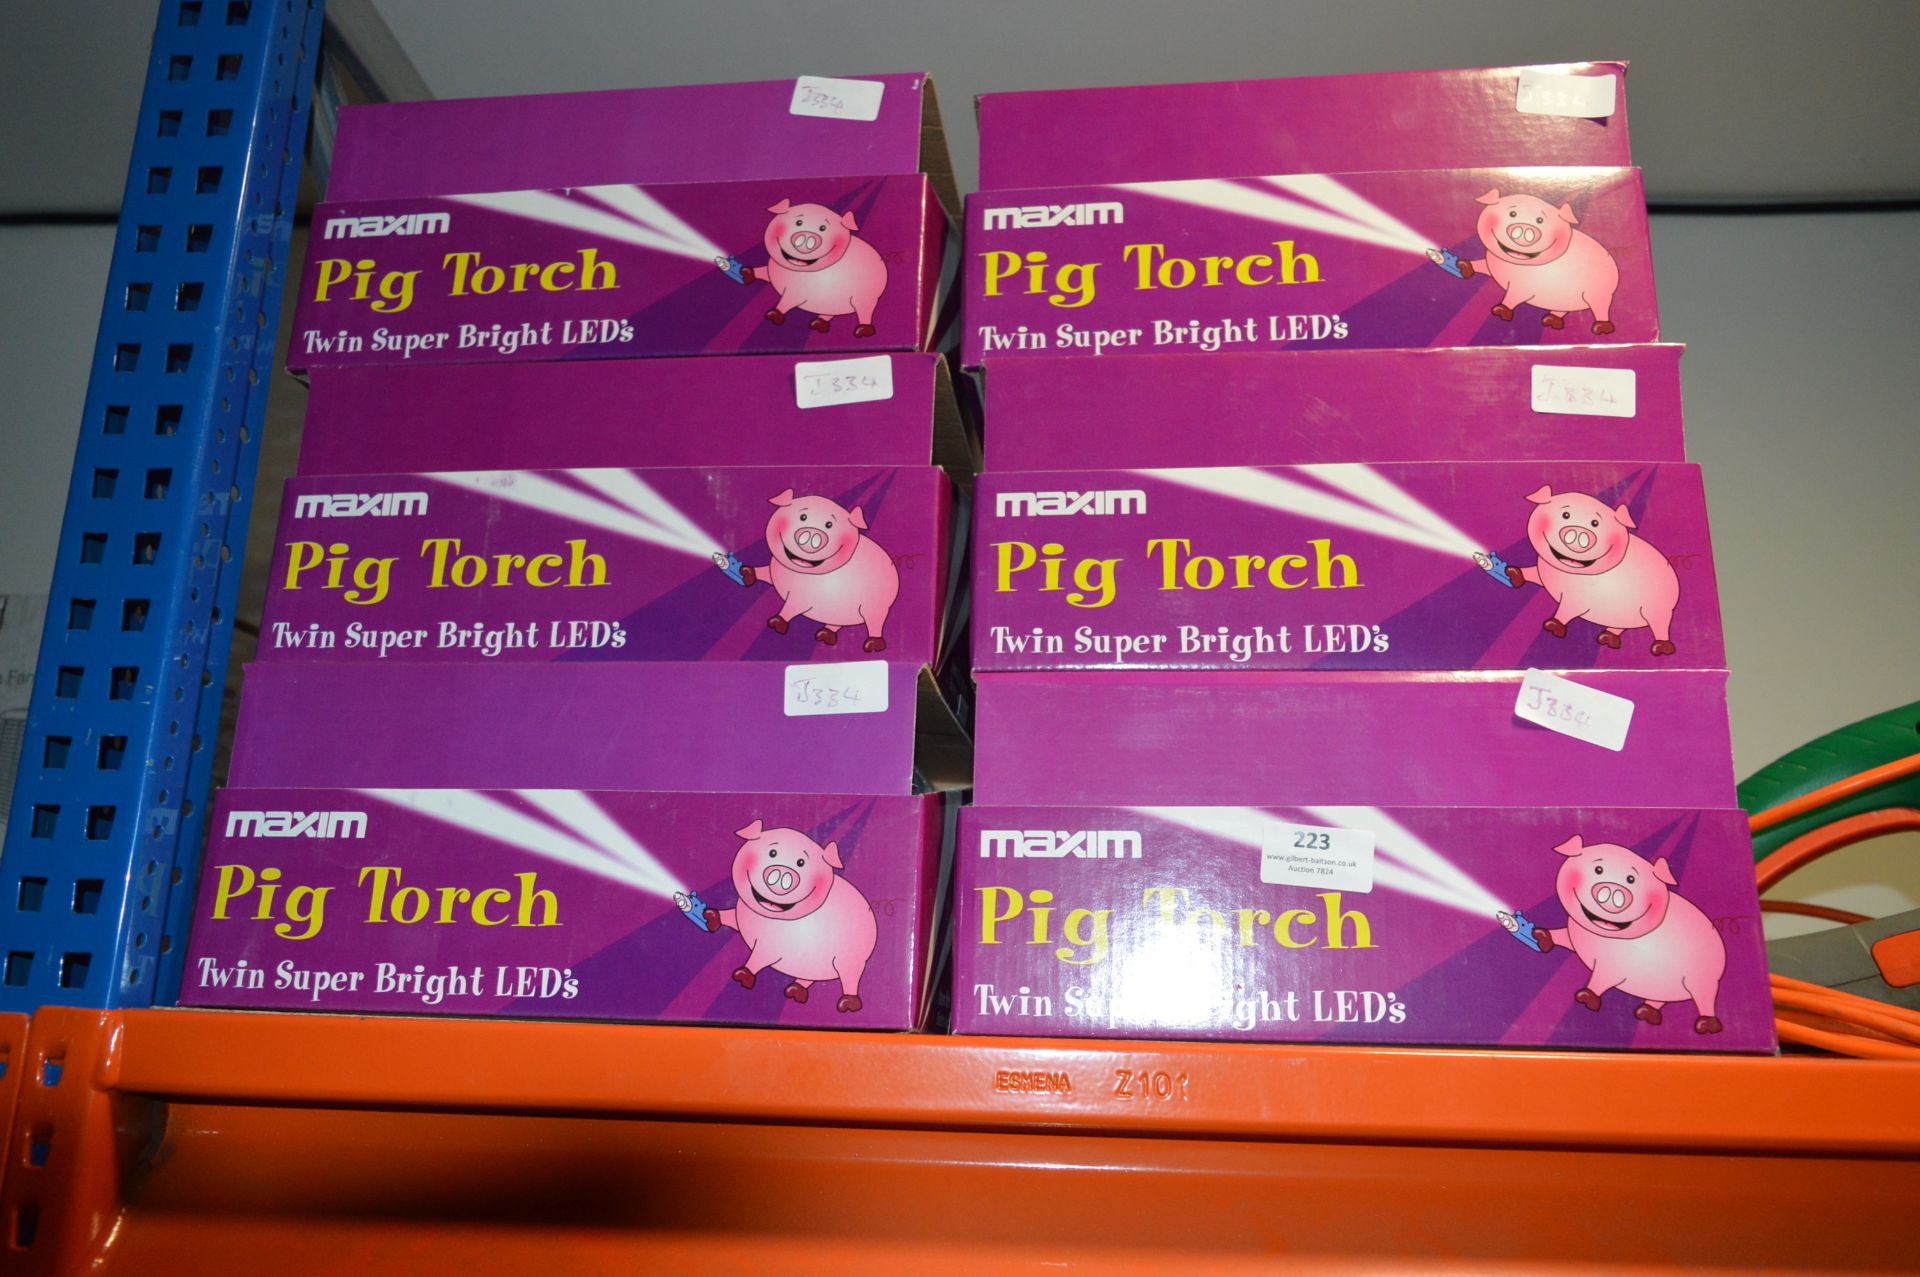 Six Boxes of Maxim PIg Torches